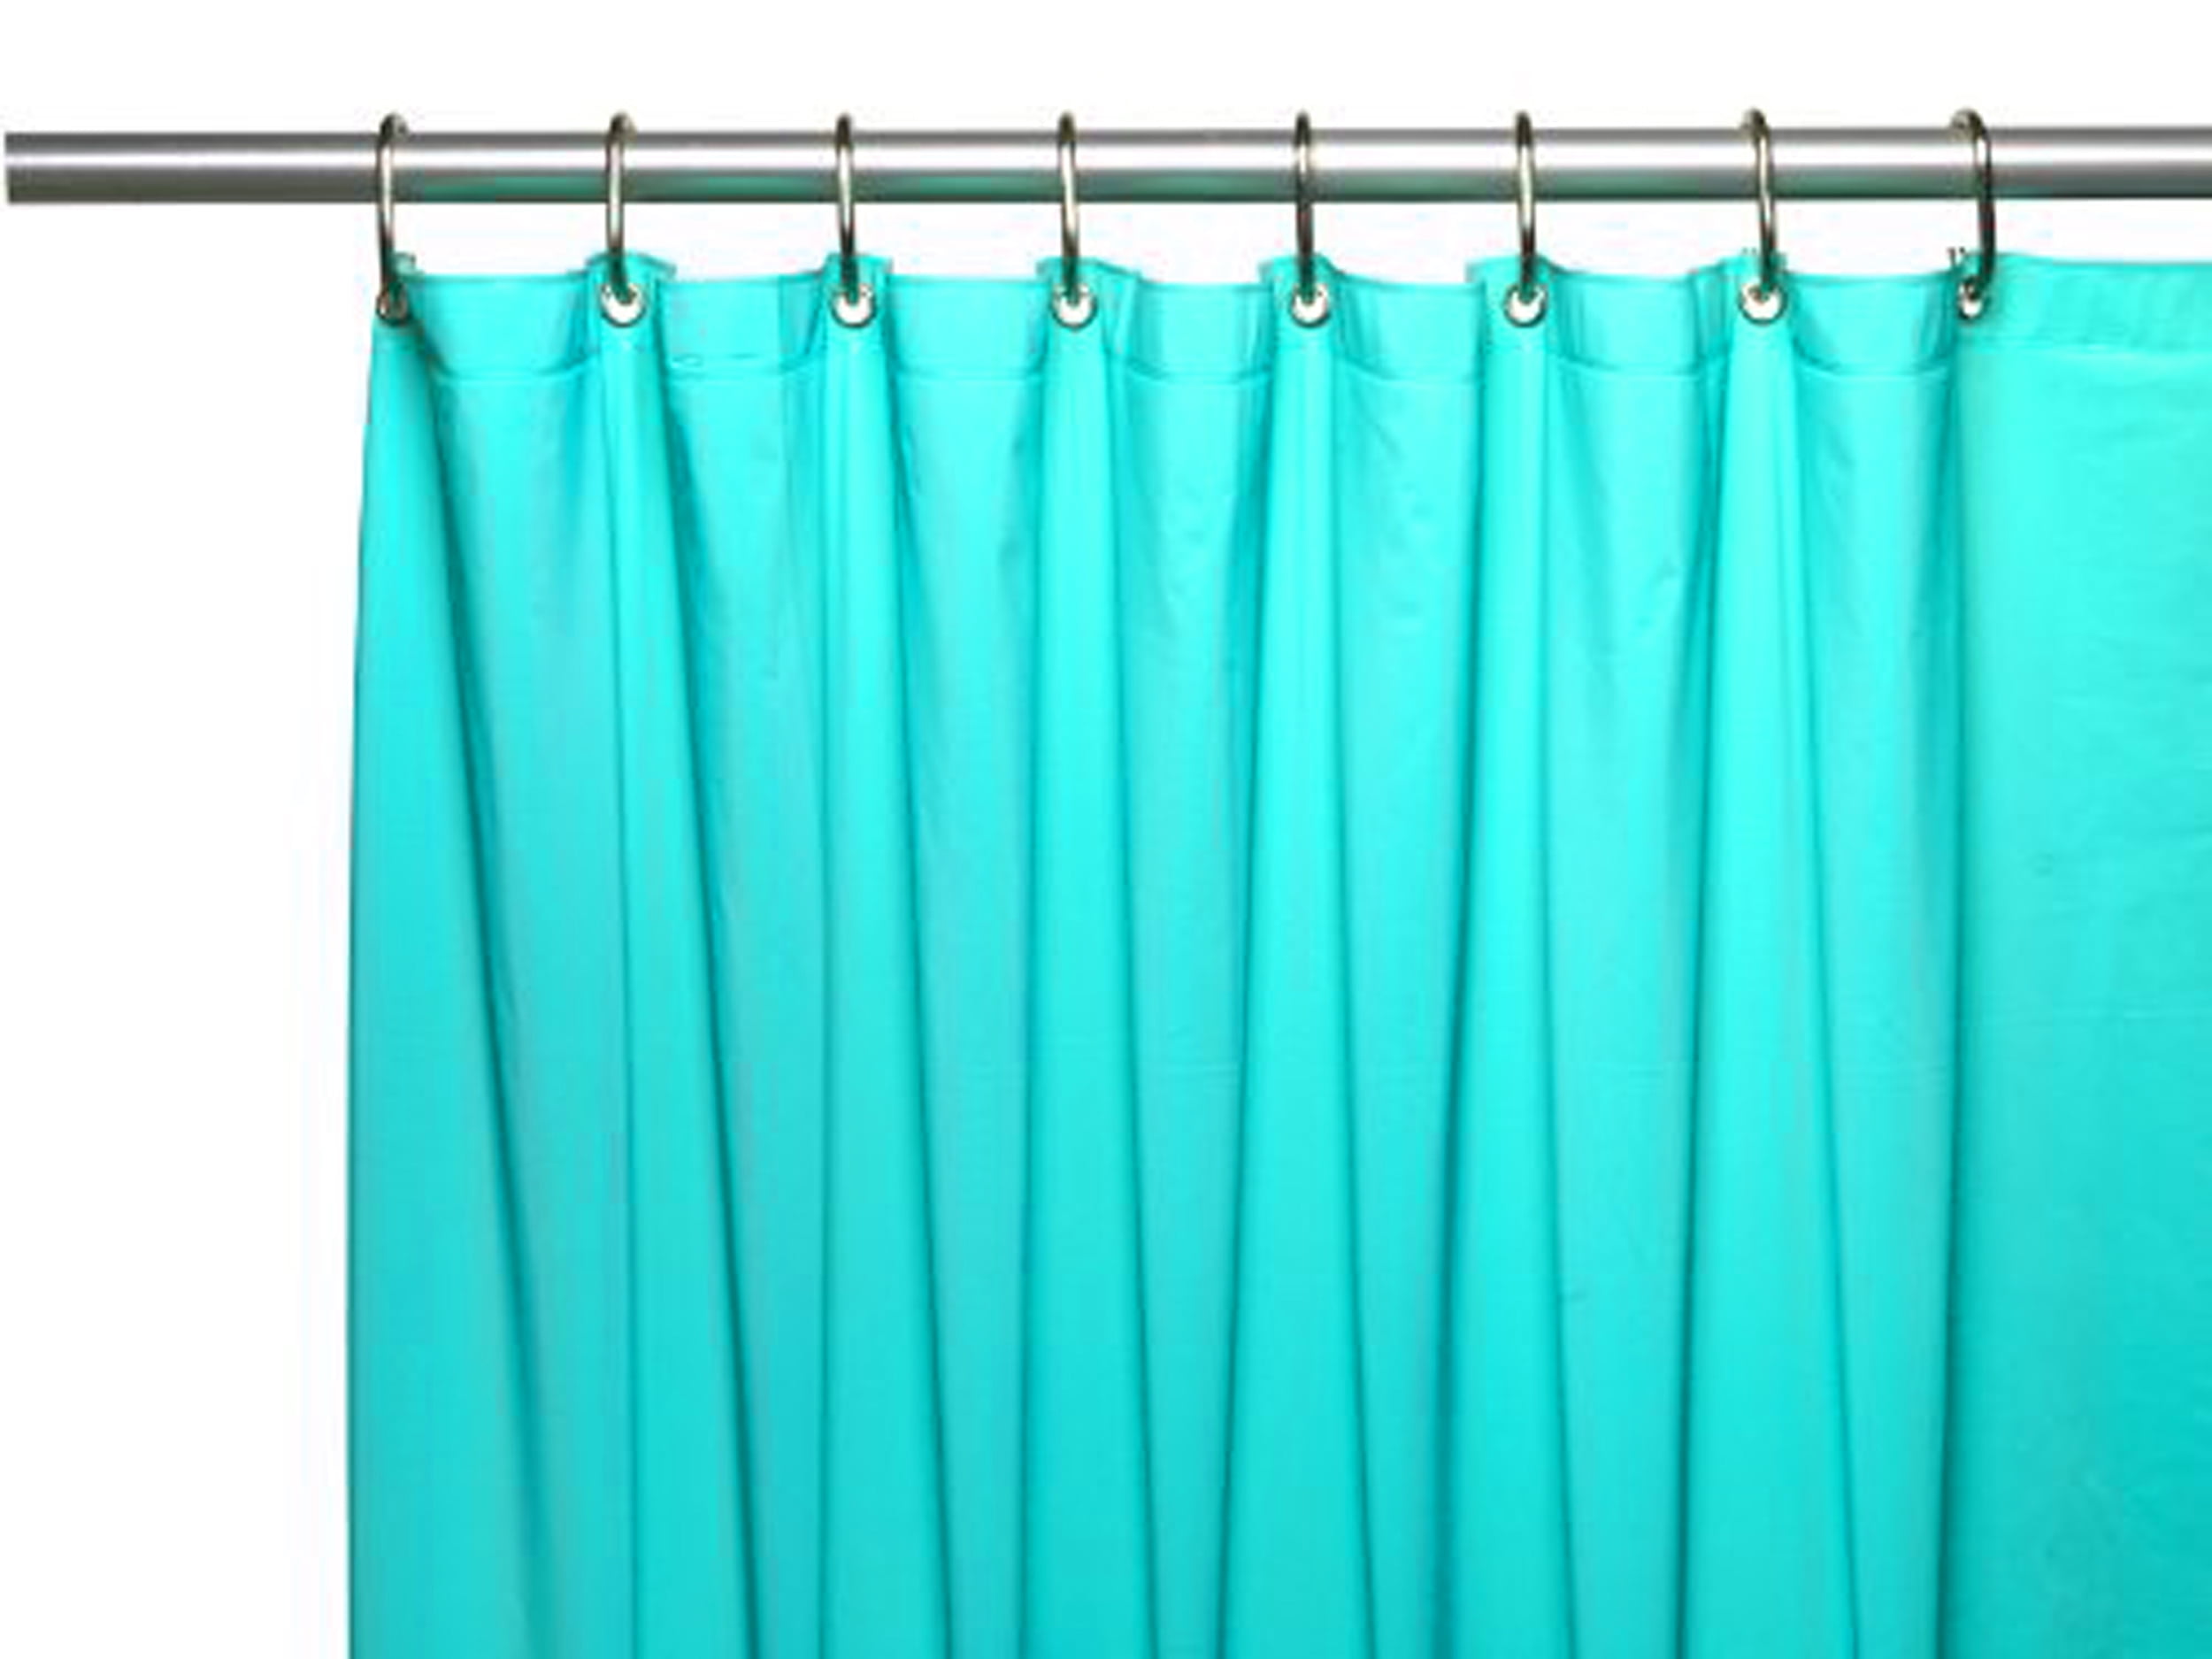 100 % Vinyl Magnetic Shower Curtain Liner with Grommets standard size 70" x 72" 